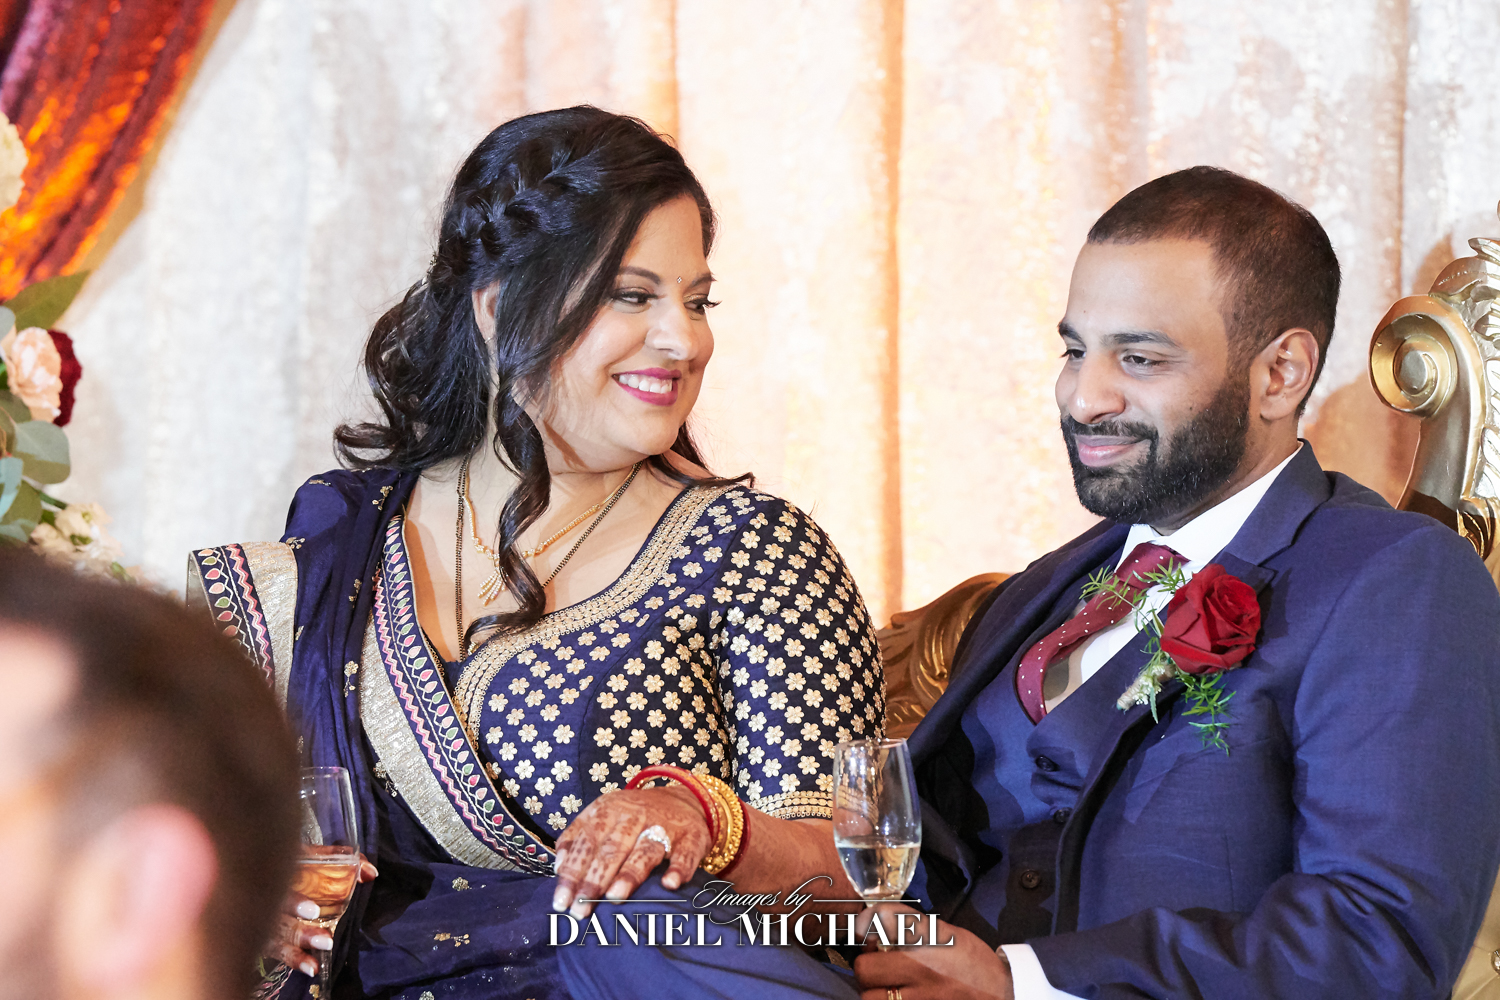 South Asian wedding photographer capturing candid moments at a wedding reception